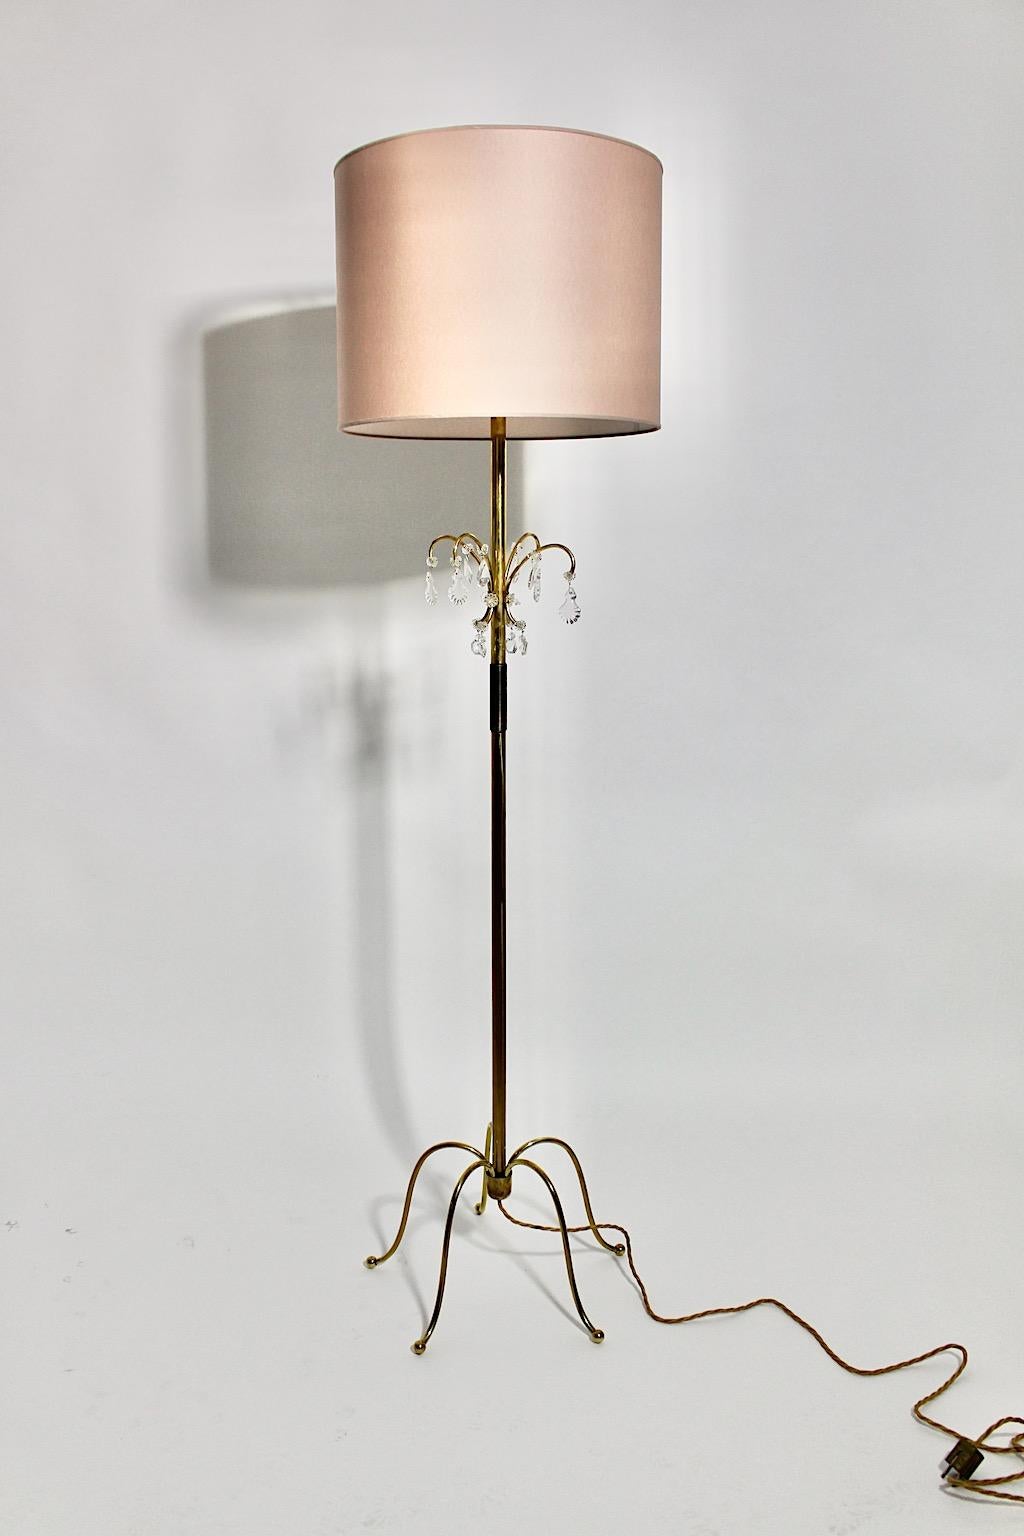 A brass crystal glass vintage Mid-Century Modern floor lamp, which was designed and executed by J.&L. Lobmeyr, 1950, Vienna.
The beautiful and delicate brass floor lamp with cut crystal glass elements shows a renewed paper lamp shade in a cute soft